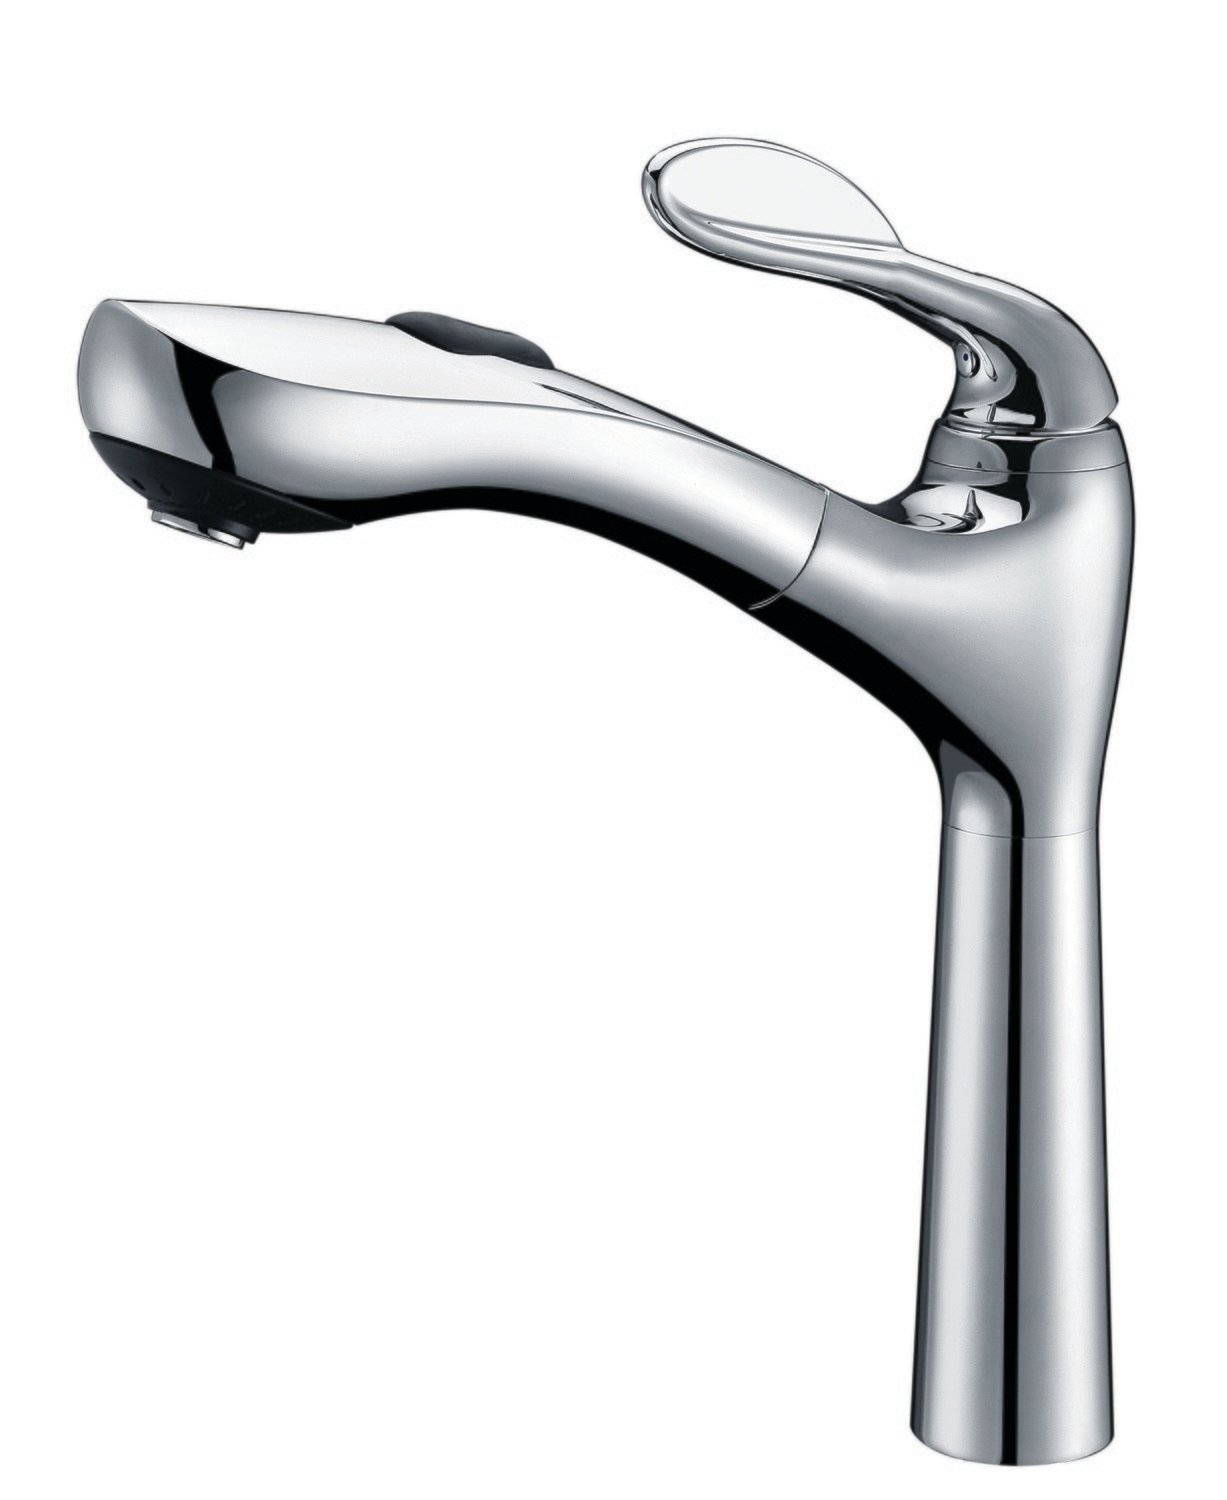 Single-handle pull-out kitchen faucet